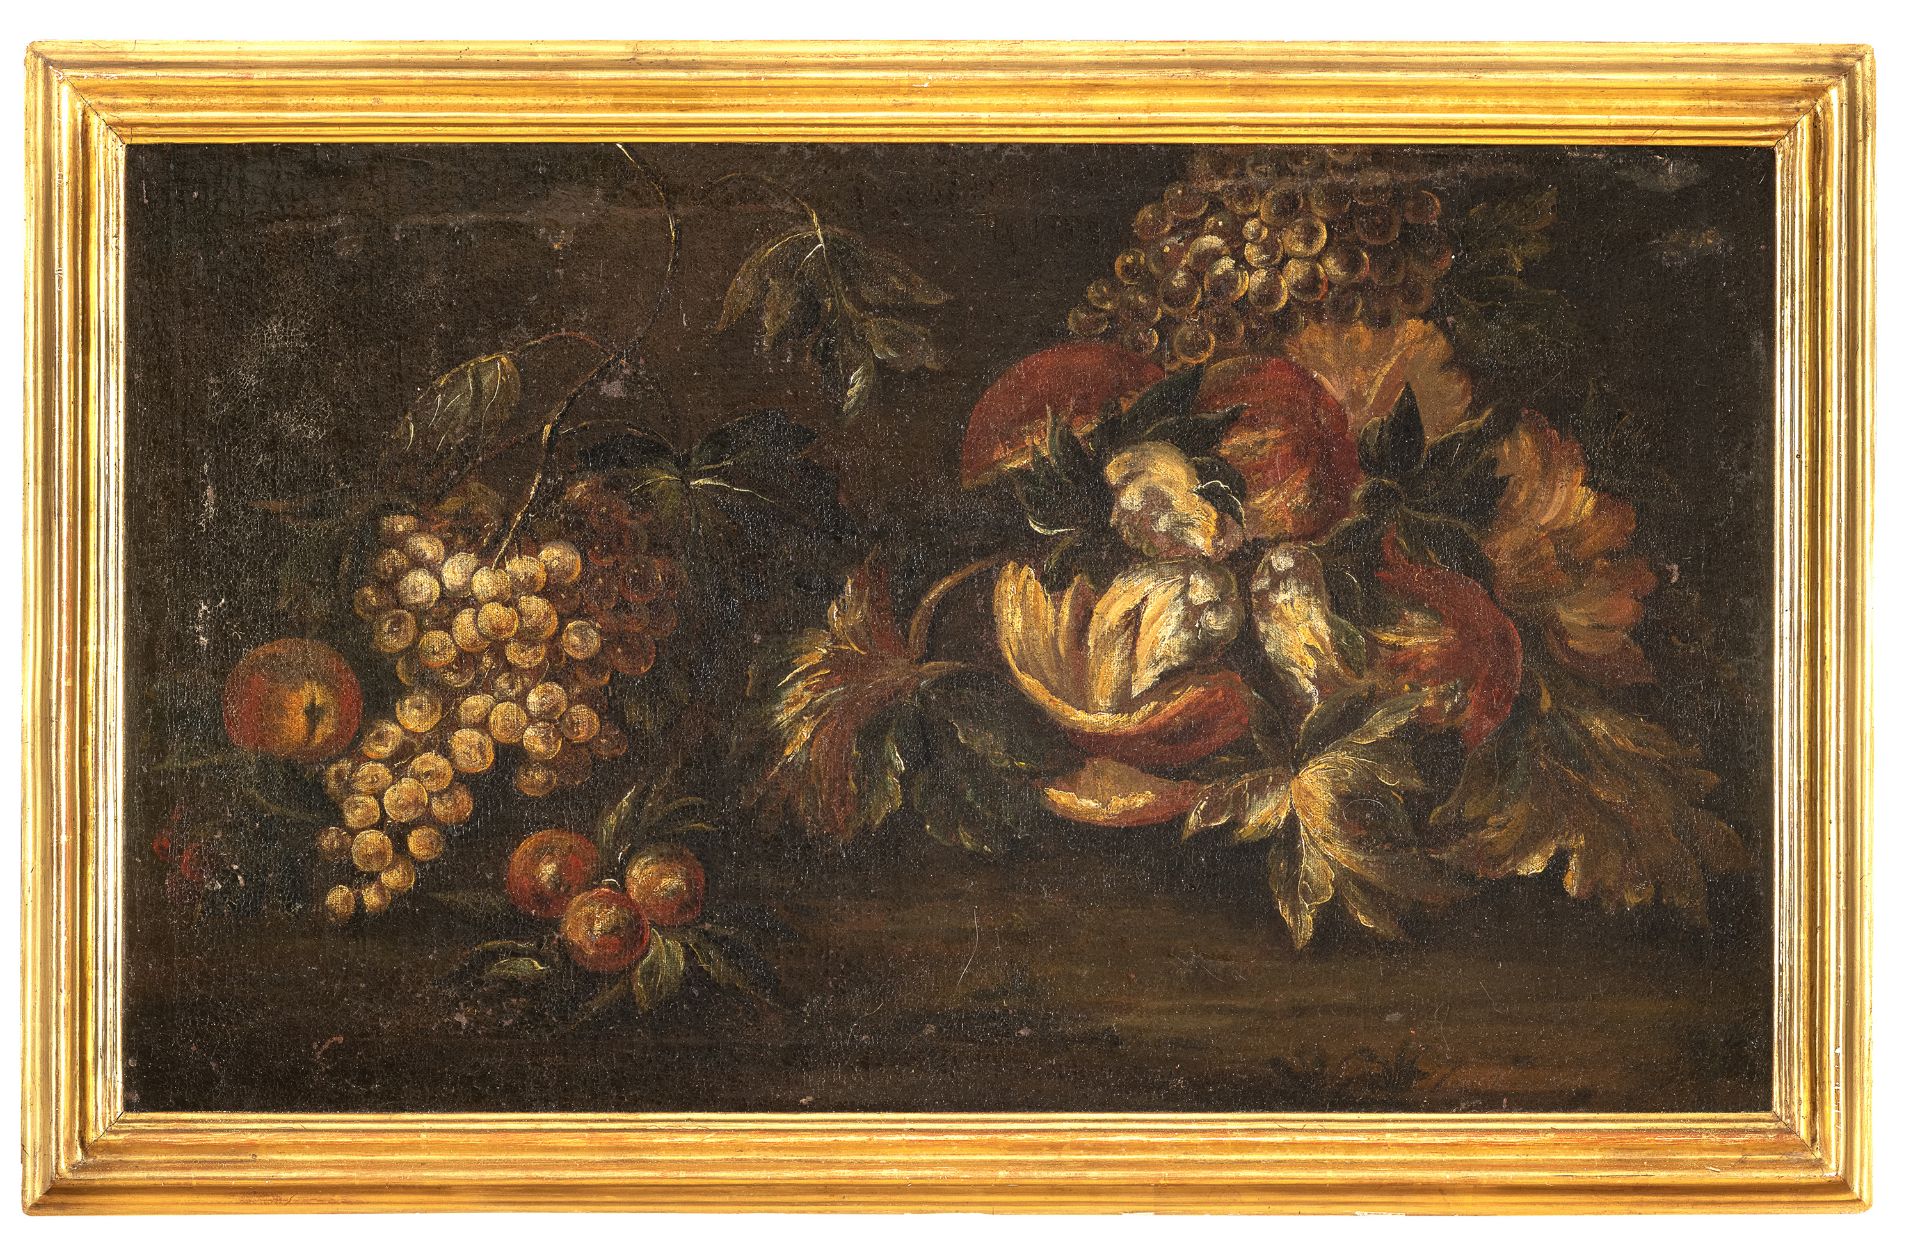 NEAPOLITAN OIL PAINTING END OF THE 17TH CENTURY